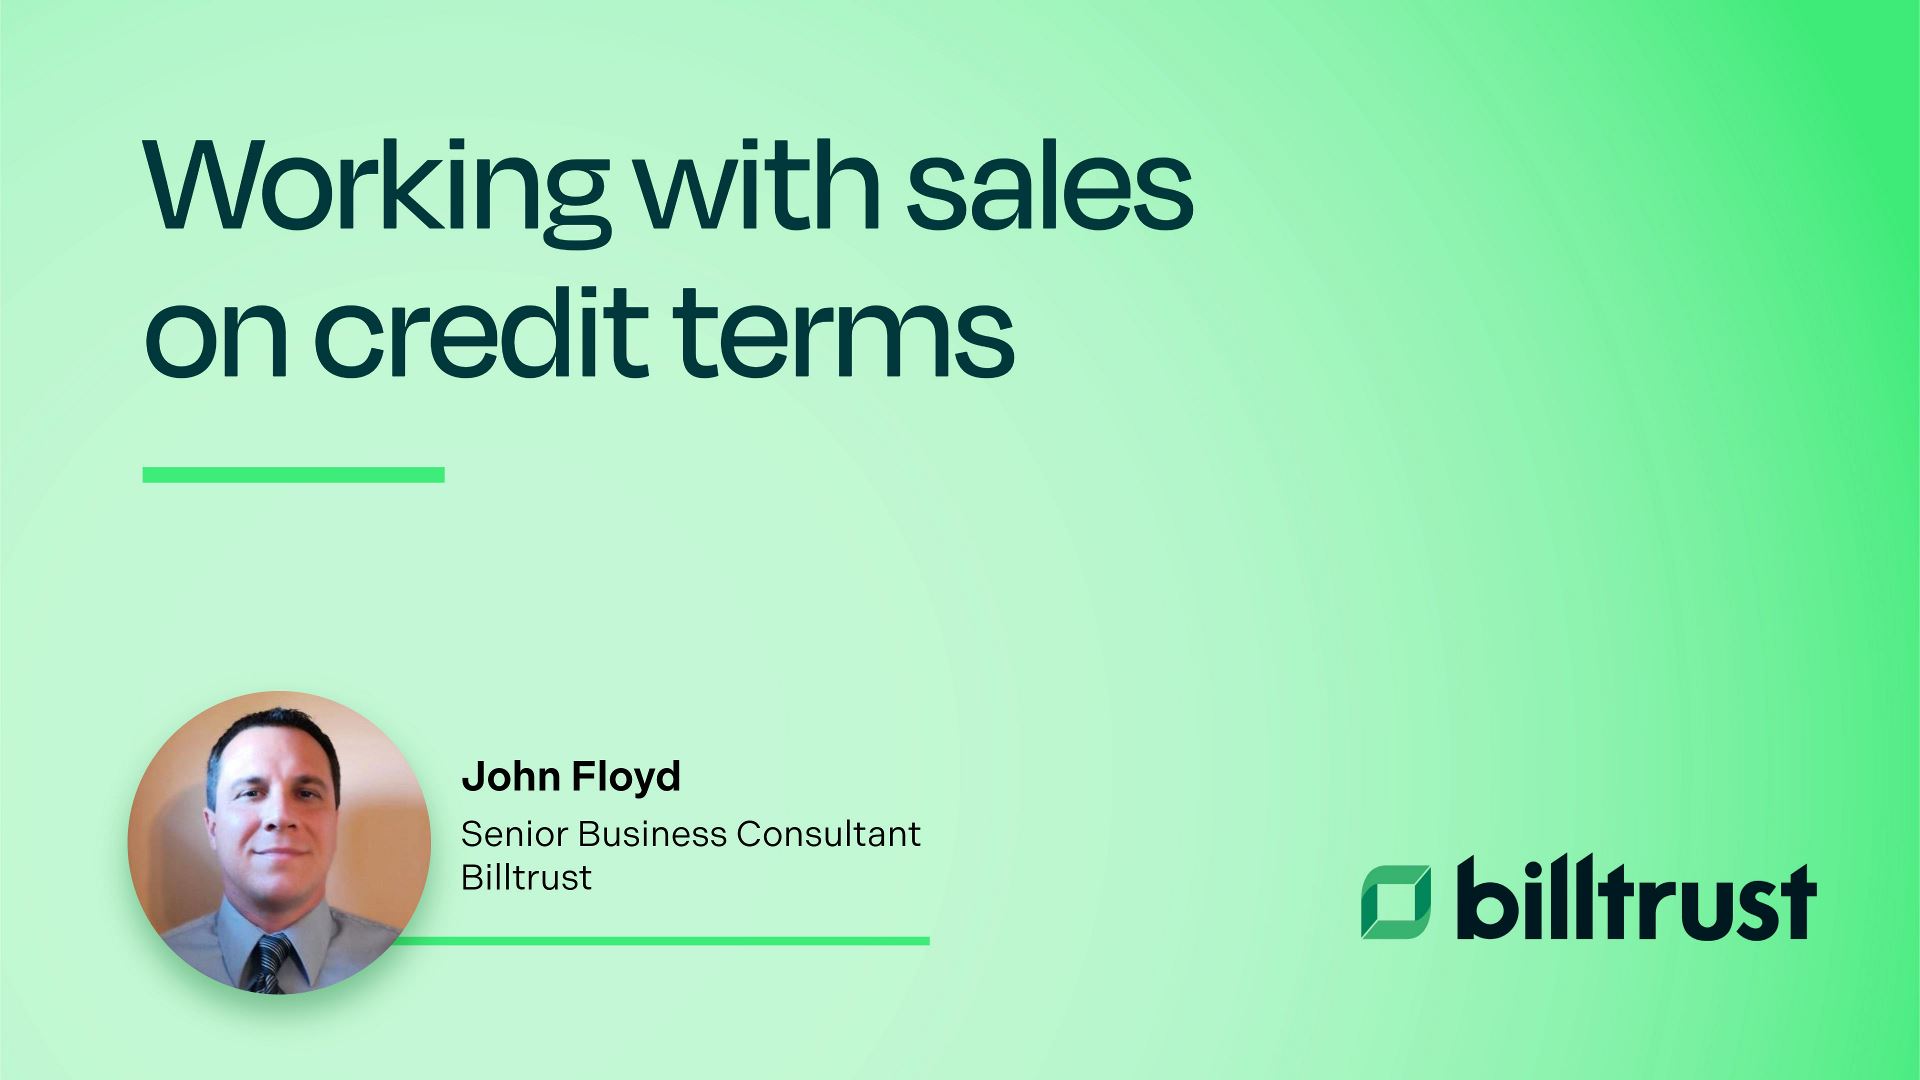 Working with sales on credit terms